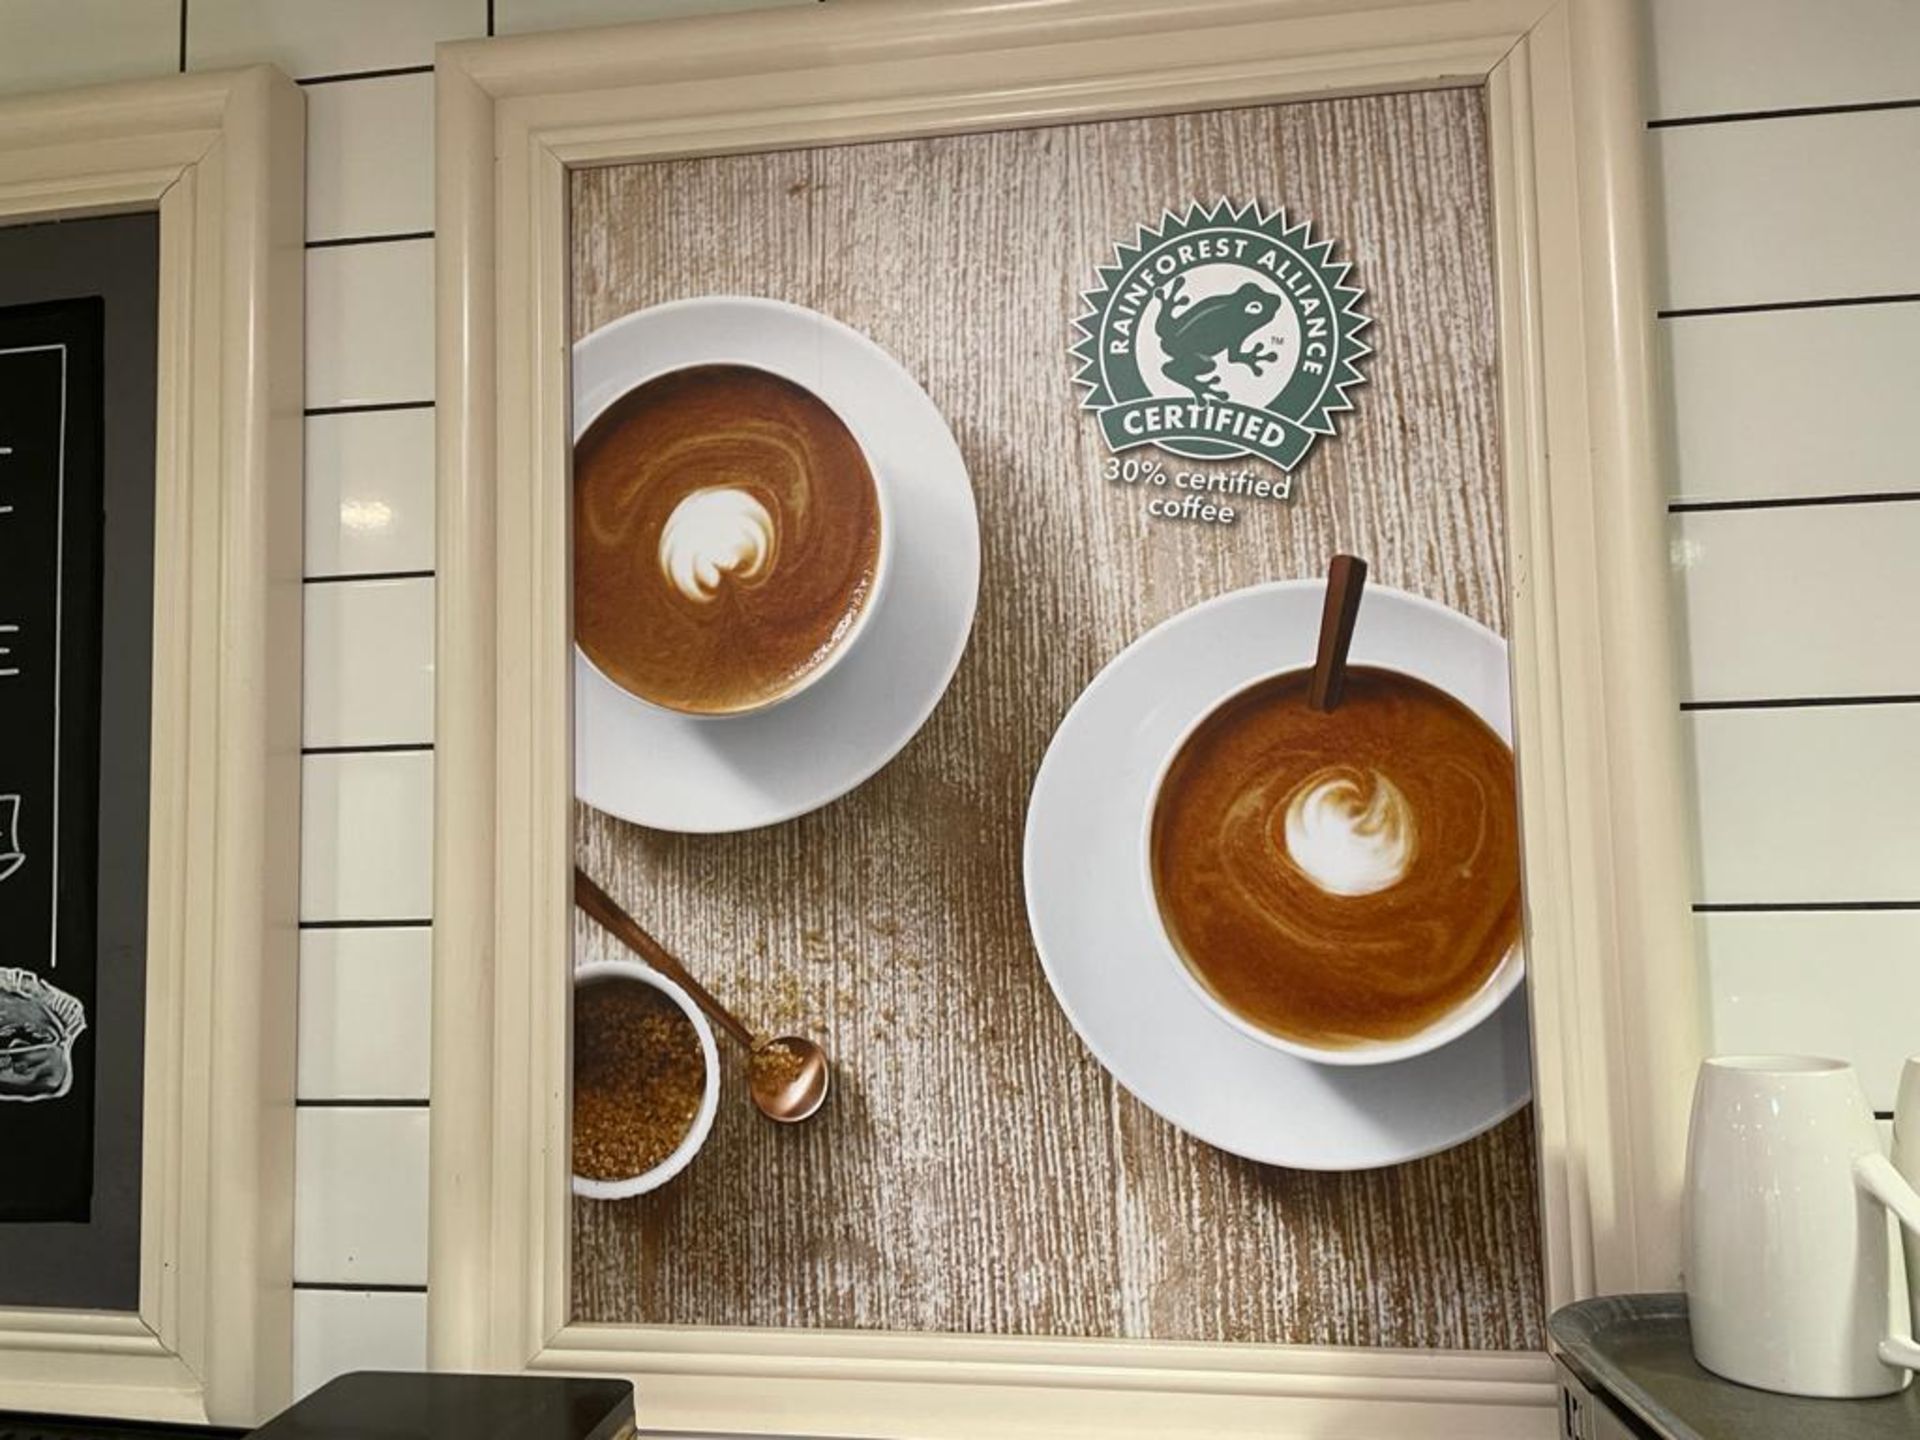 4 x Framed Advertising Signs Including Coffee Sign and Chalk Menu Price Boards - CL670 - Ref: GEM164 - Image 5 of 7